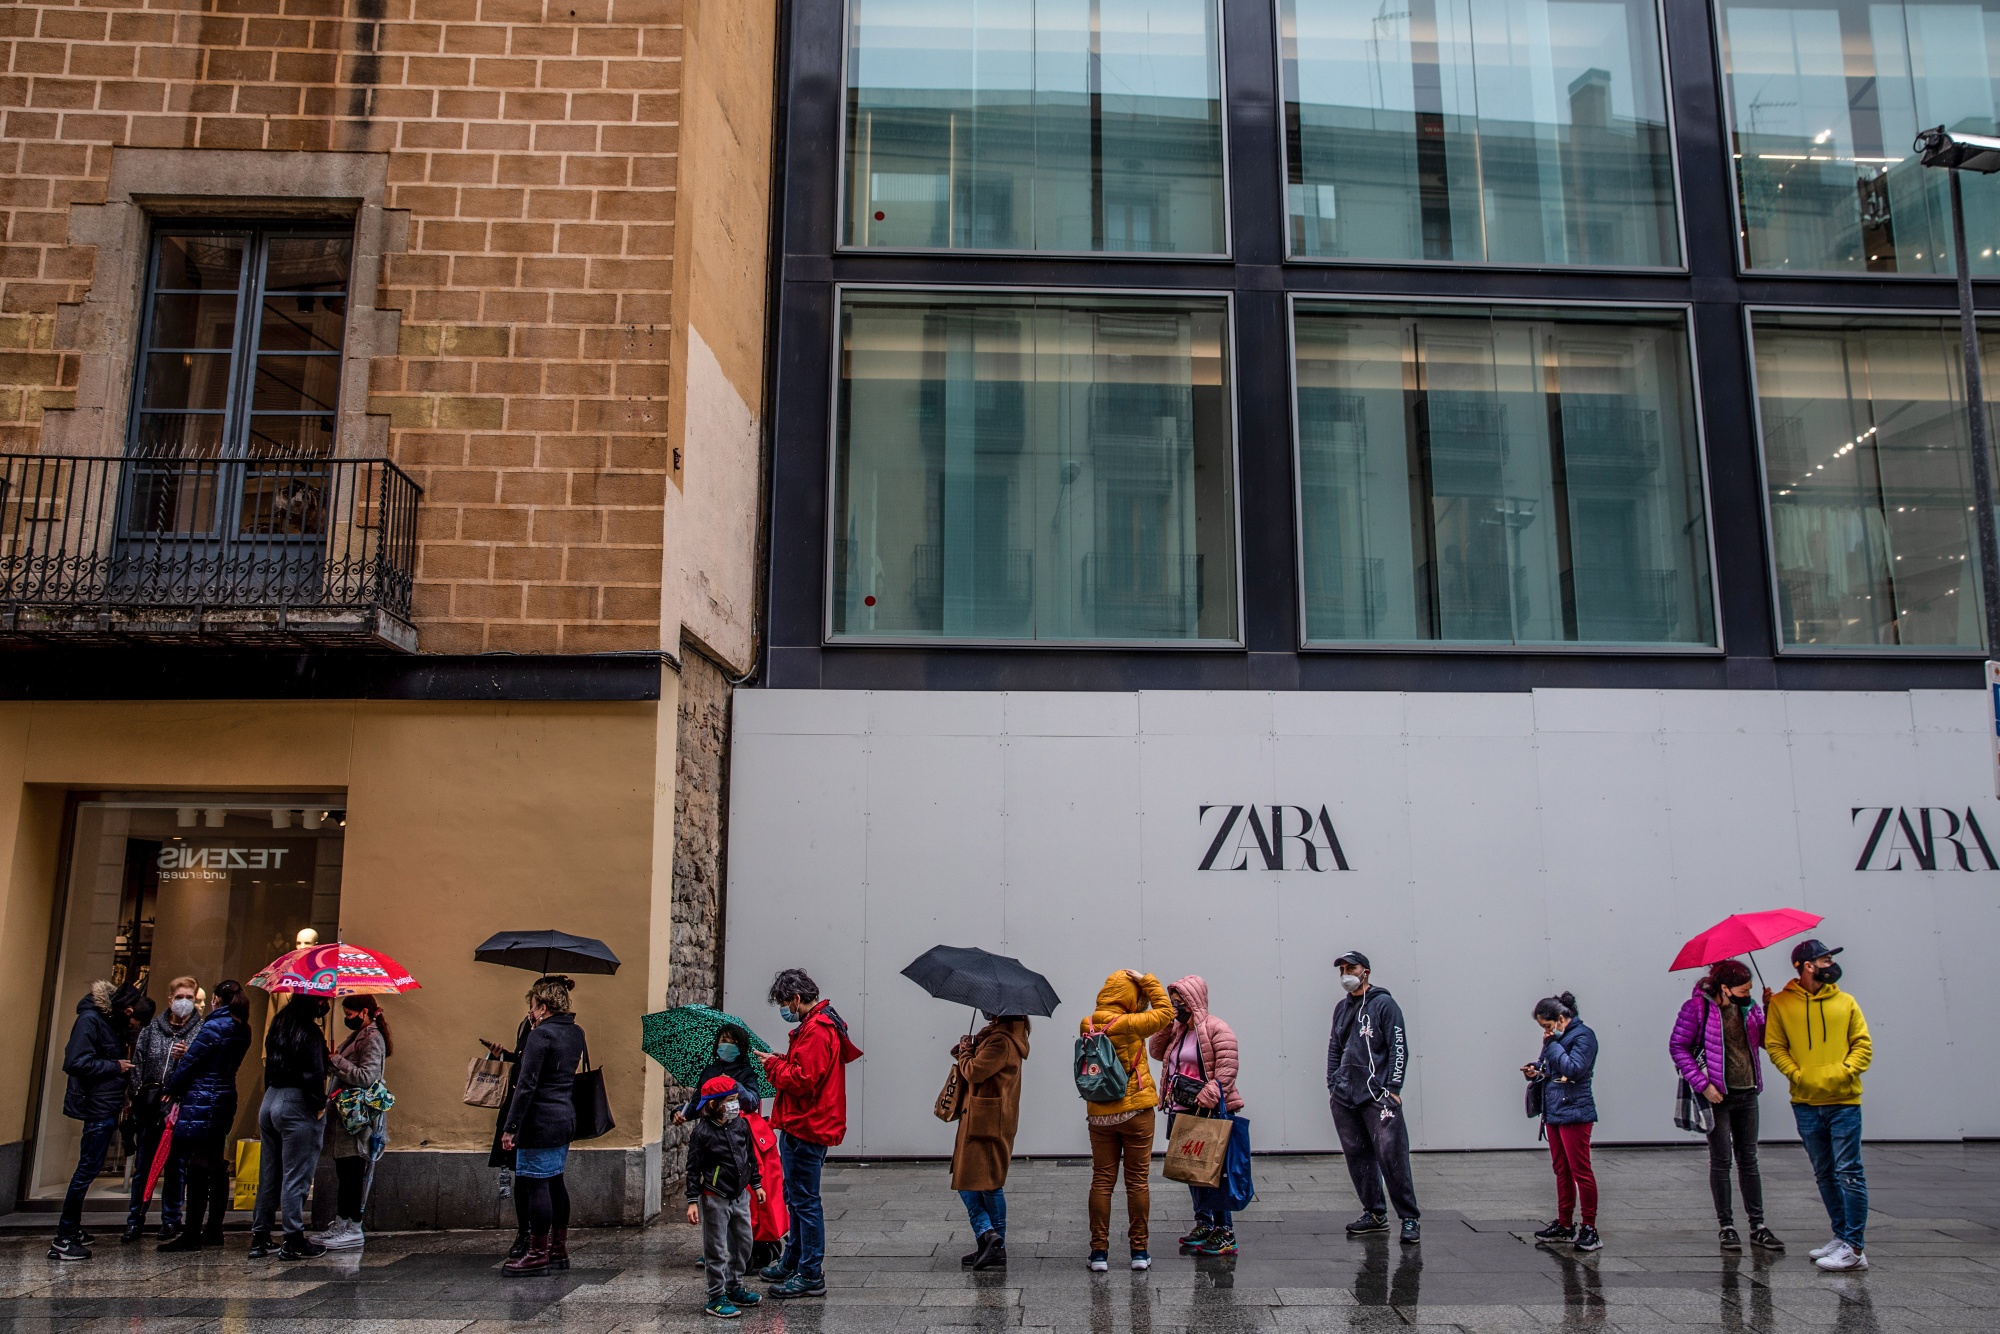 Supply Chain Latest: Zara Owner Succeeds With Regional Networks